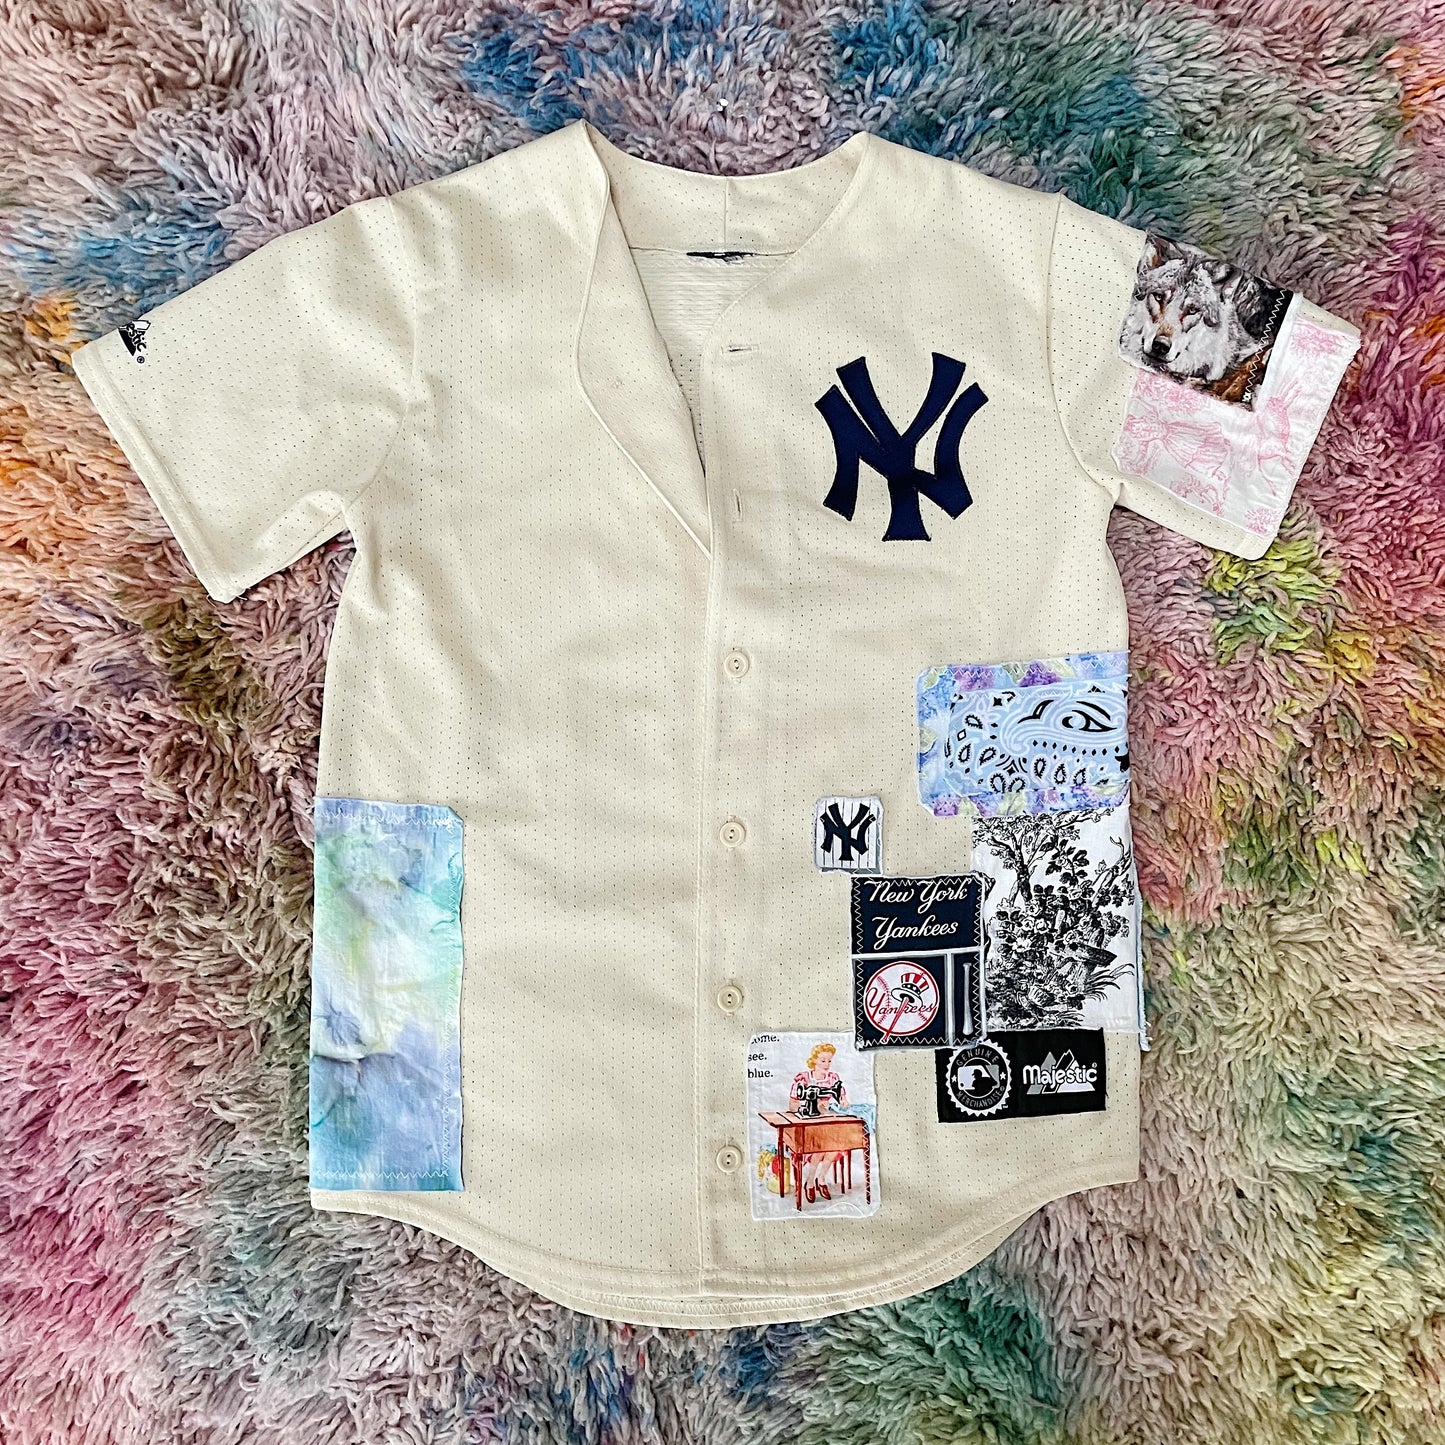 Majestic, Shirts & Tops, Vintage Yankees Jersey For Kids